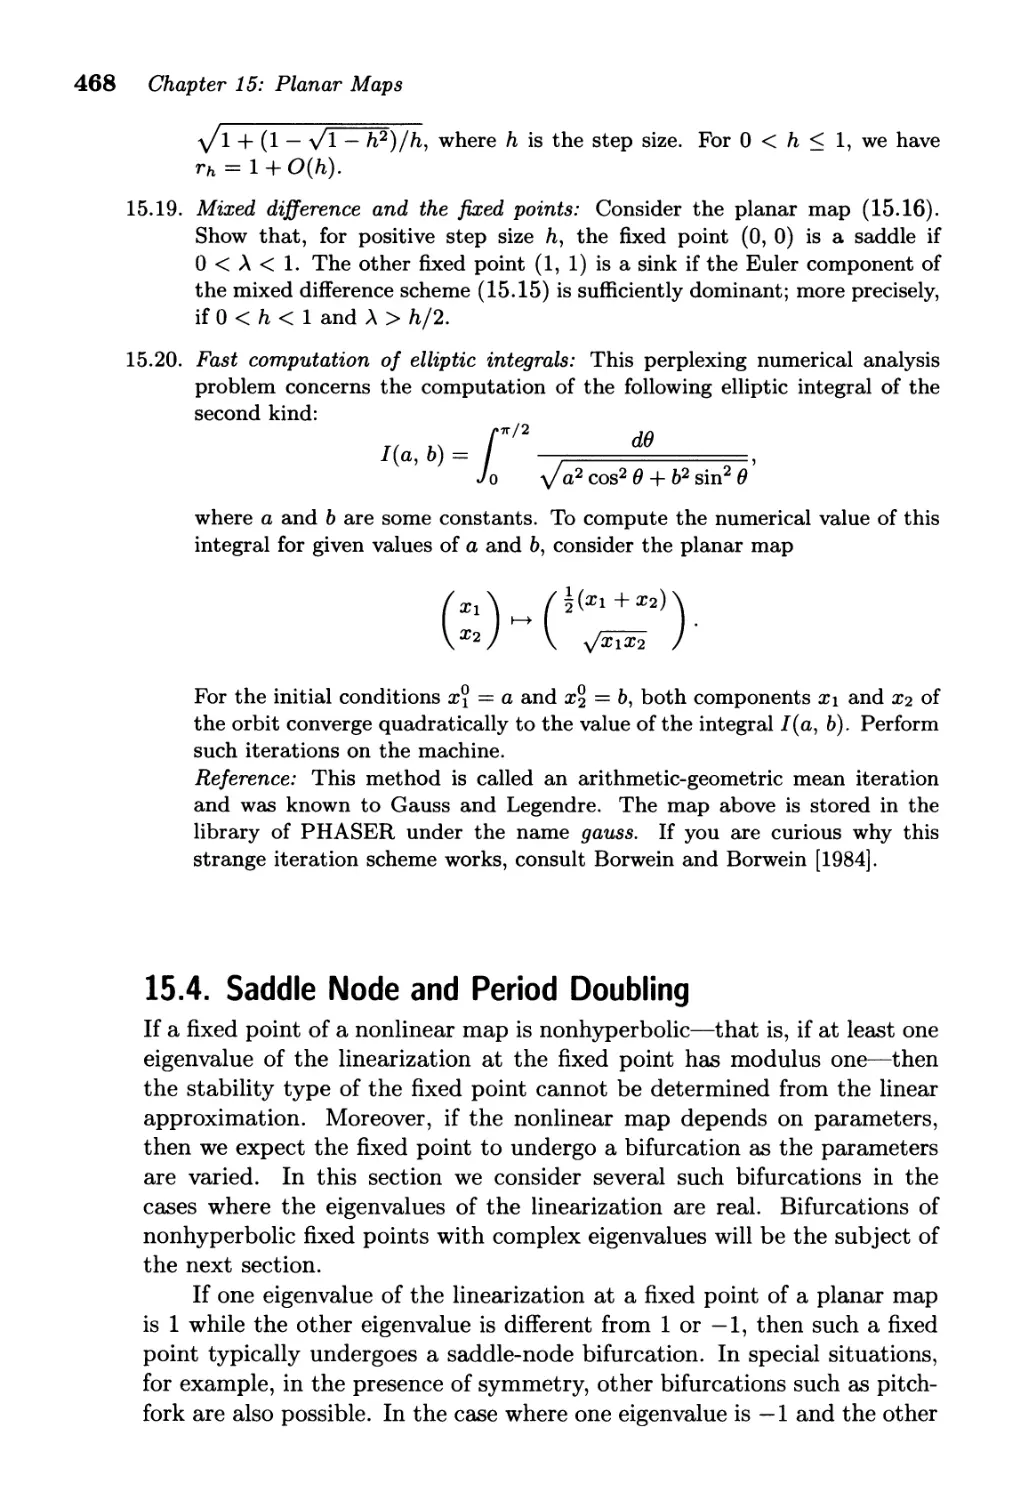 15.4. Saddle Node and Period Doubling